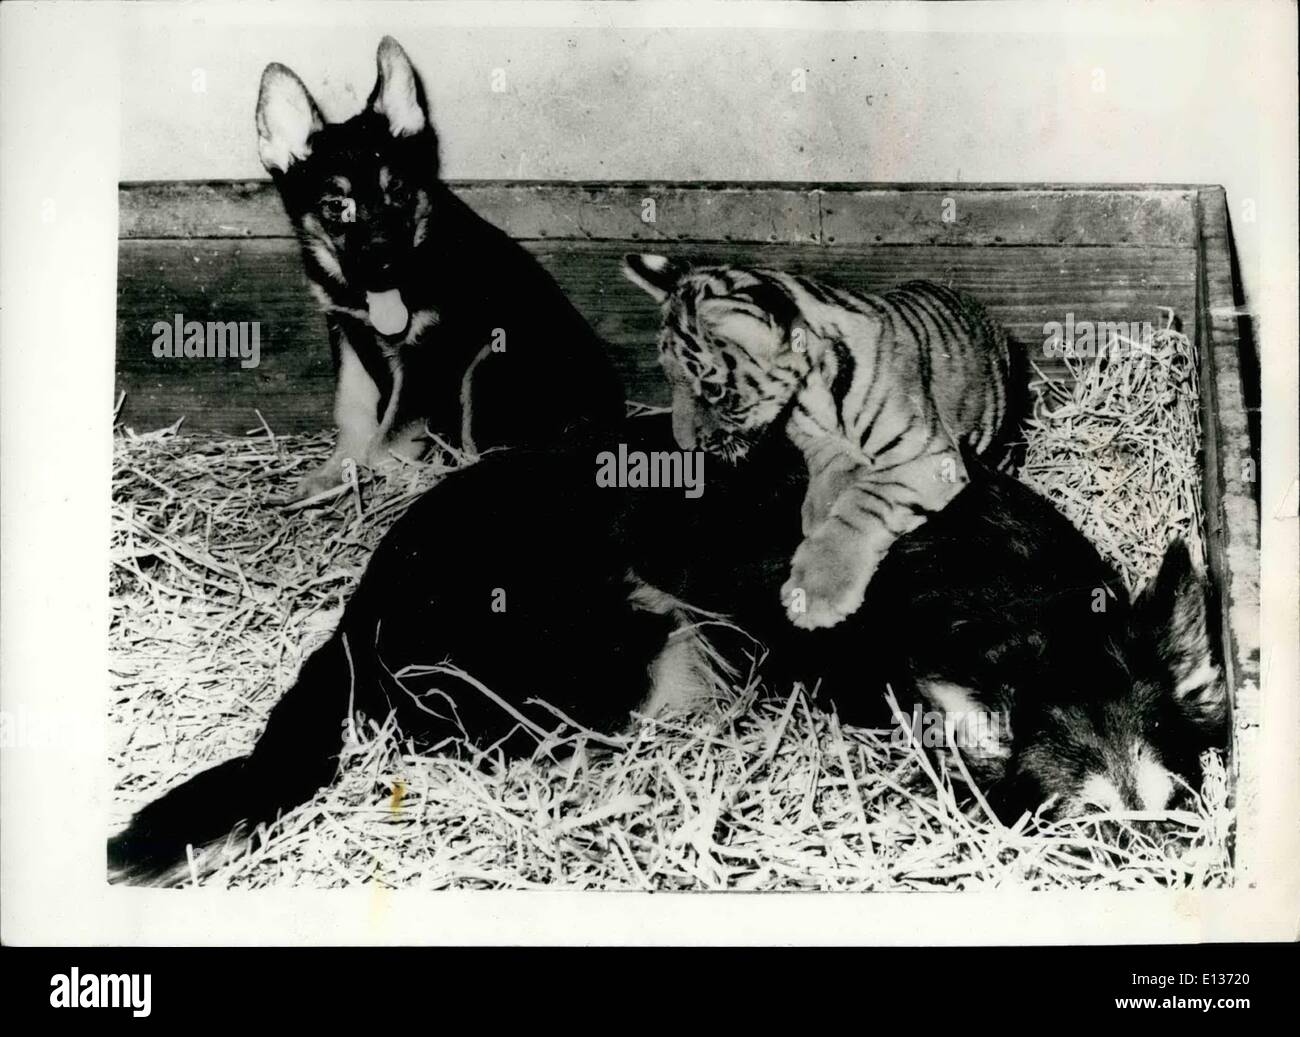 Feb. 29, 2012 - Shepherd dog becomes foster mother to a tiger baby. A newly born tiger cub Ganga at the Berlin Zoo, was abandoned by its mother immediately after birth. The zoo authorities sent out an S.O.S. to animal lovers for a foster mother. Astra , a sheep dog soon arrived, complete with her own baby Benno . Now Astra has taken on the role of foster mother with complete success and Benno is a first class playmate for the tiger cub. Keystone Photo Shows: Astra with the tiger cub and her puppy Benno at the Berlin Zoo. Stock Photo